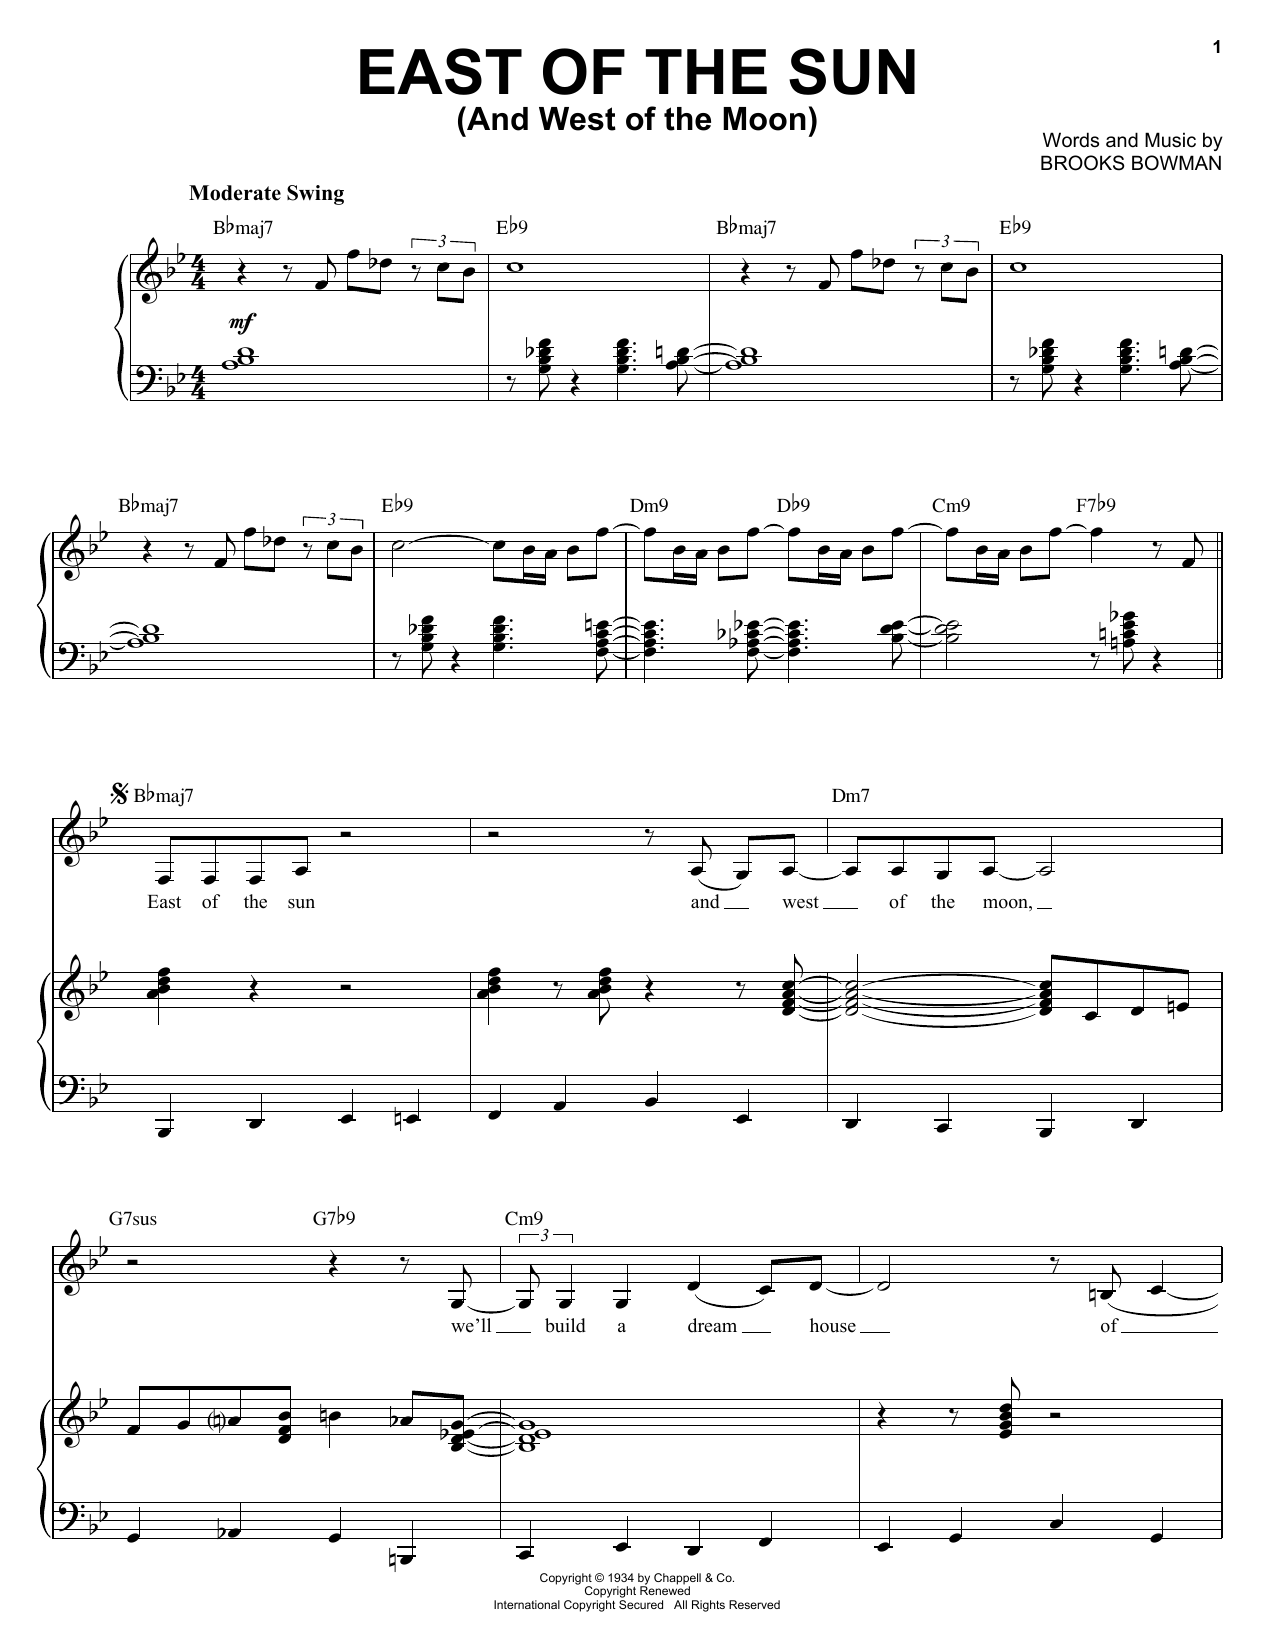 Download Diana Krall East Of The Sun (And West Of The Moon) Sheet Music